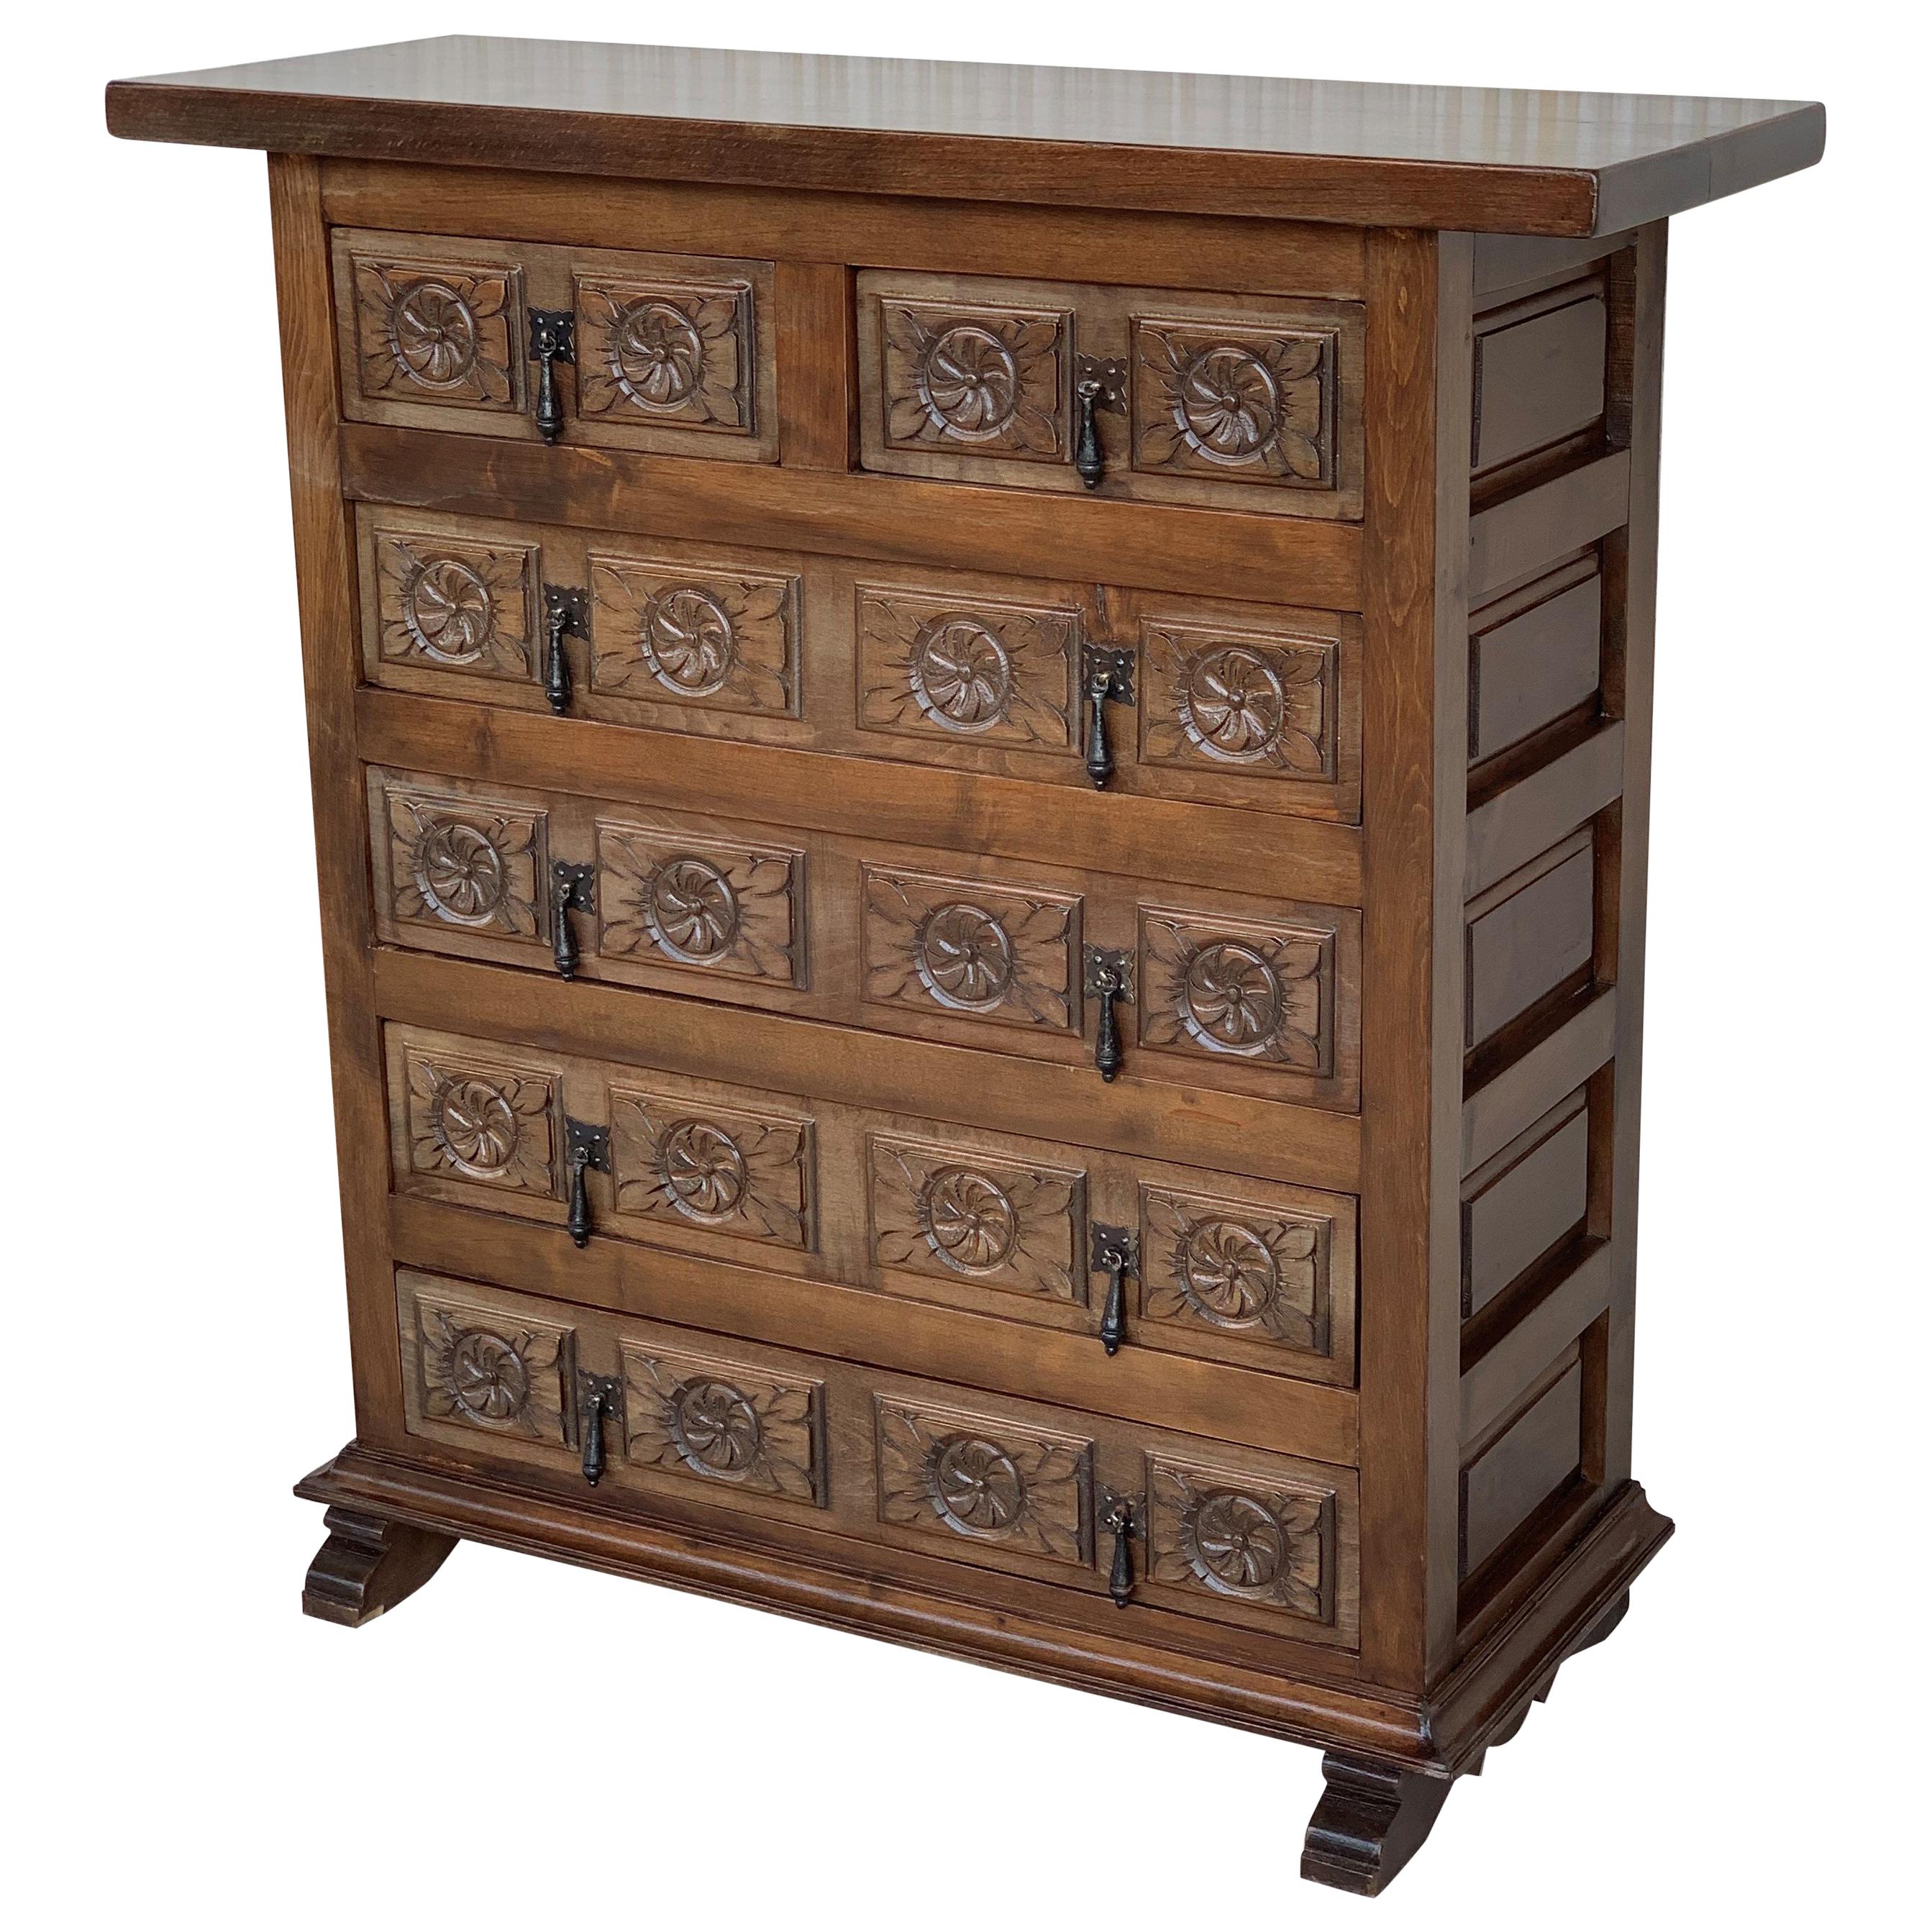 19th Catalan Spanish Carved Walnut Chest of Drawers, Highboy or Console